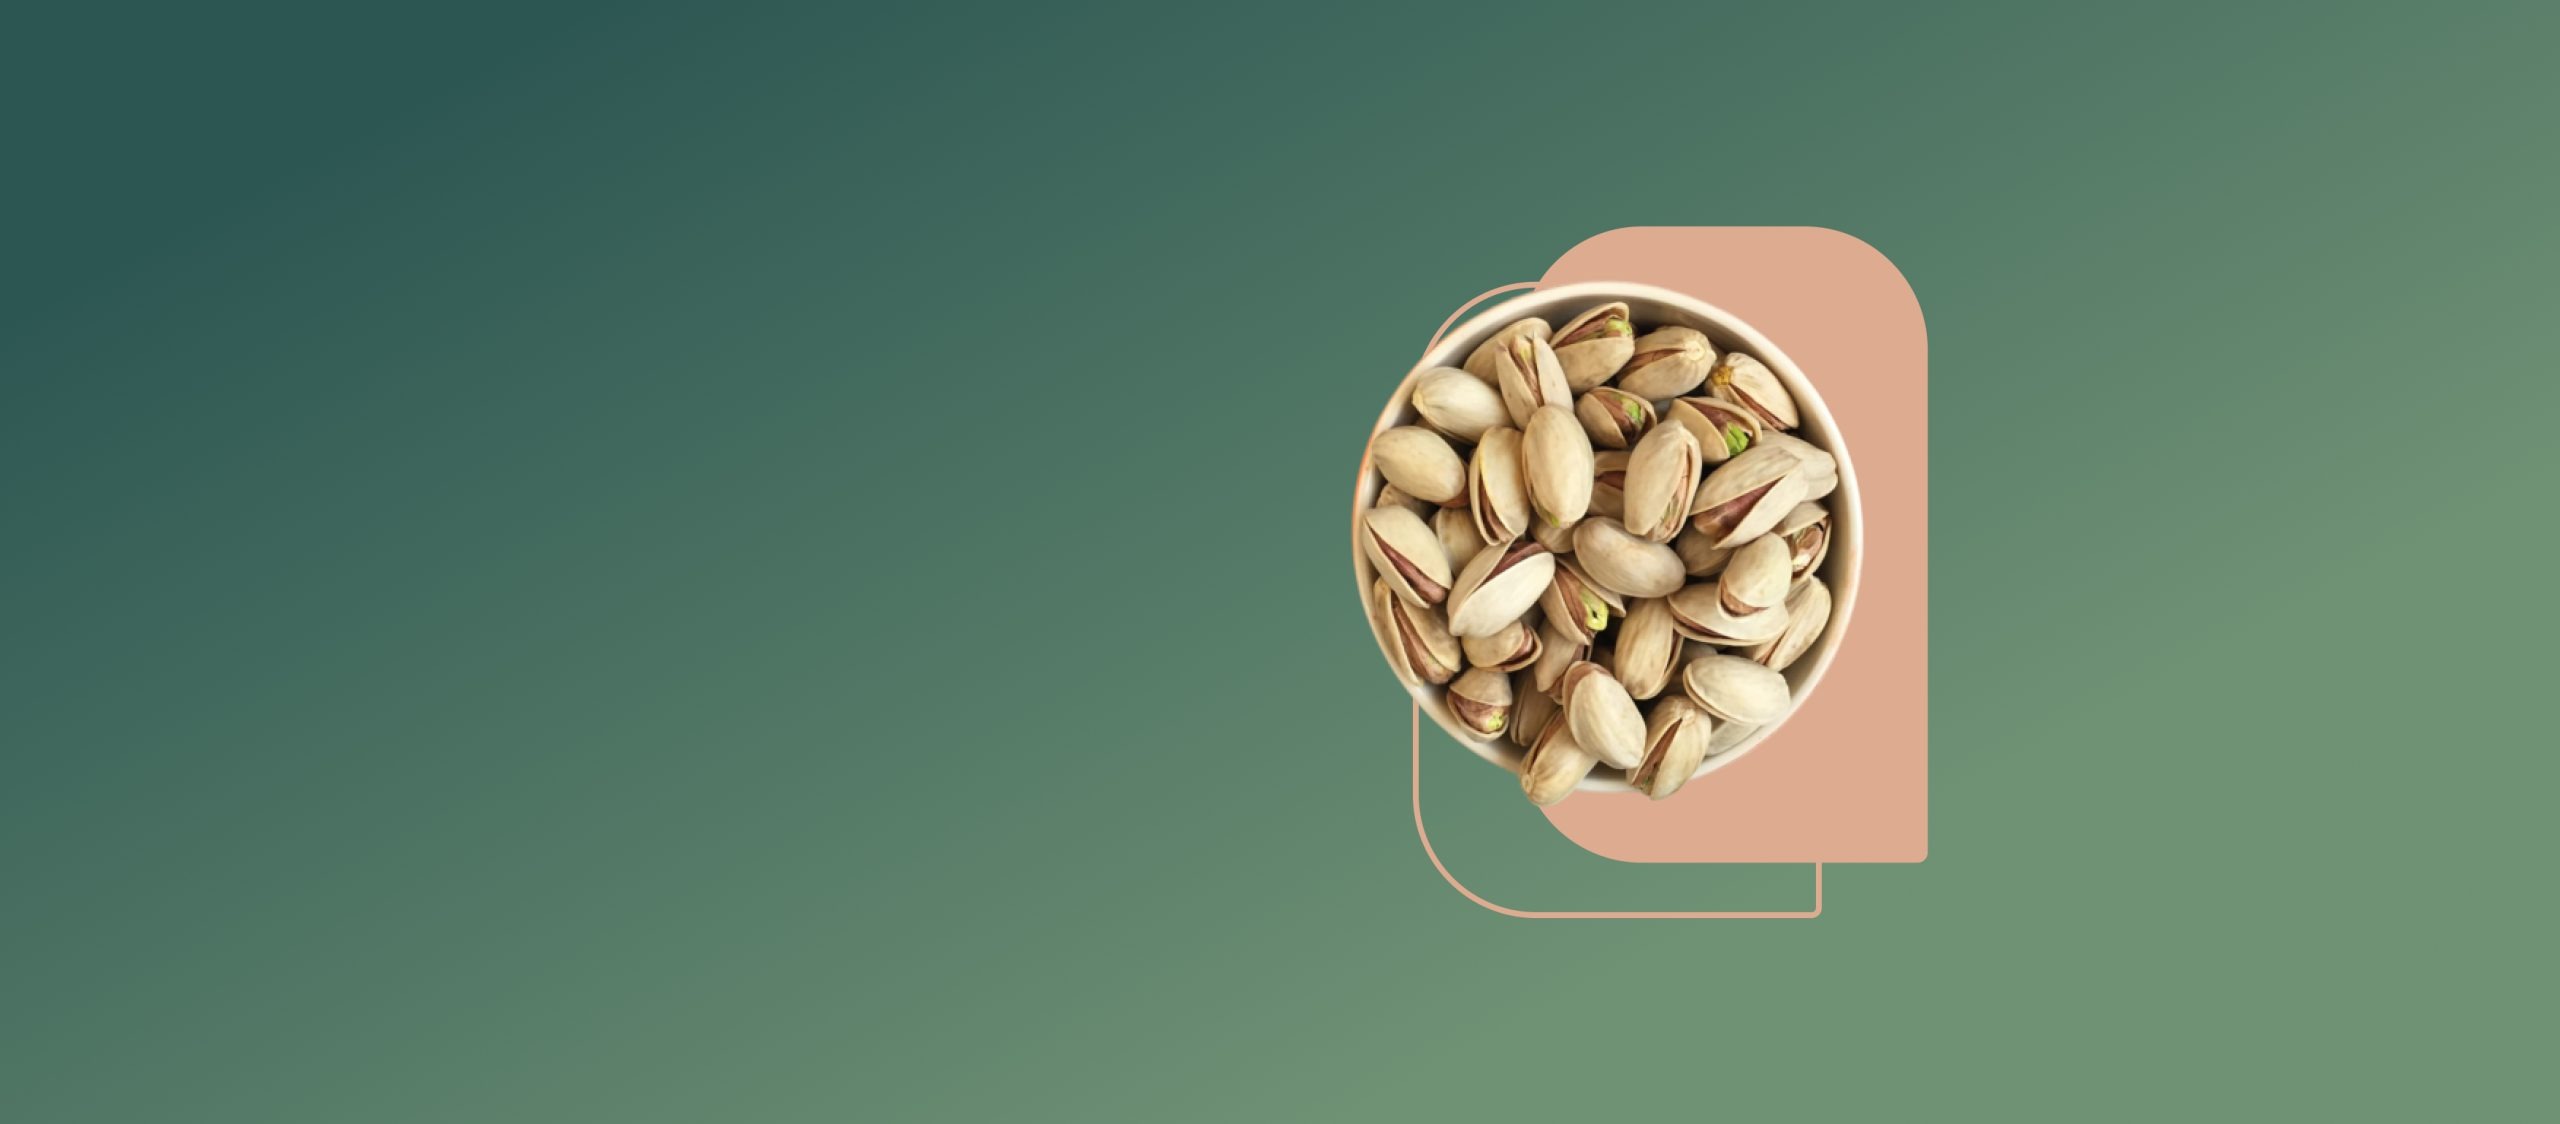 Manouchehri Nuts: A leading exporter of nuts and dried fruits in Iran